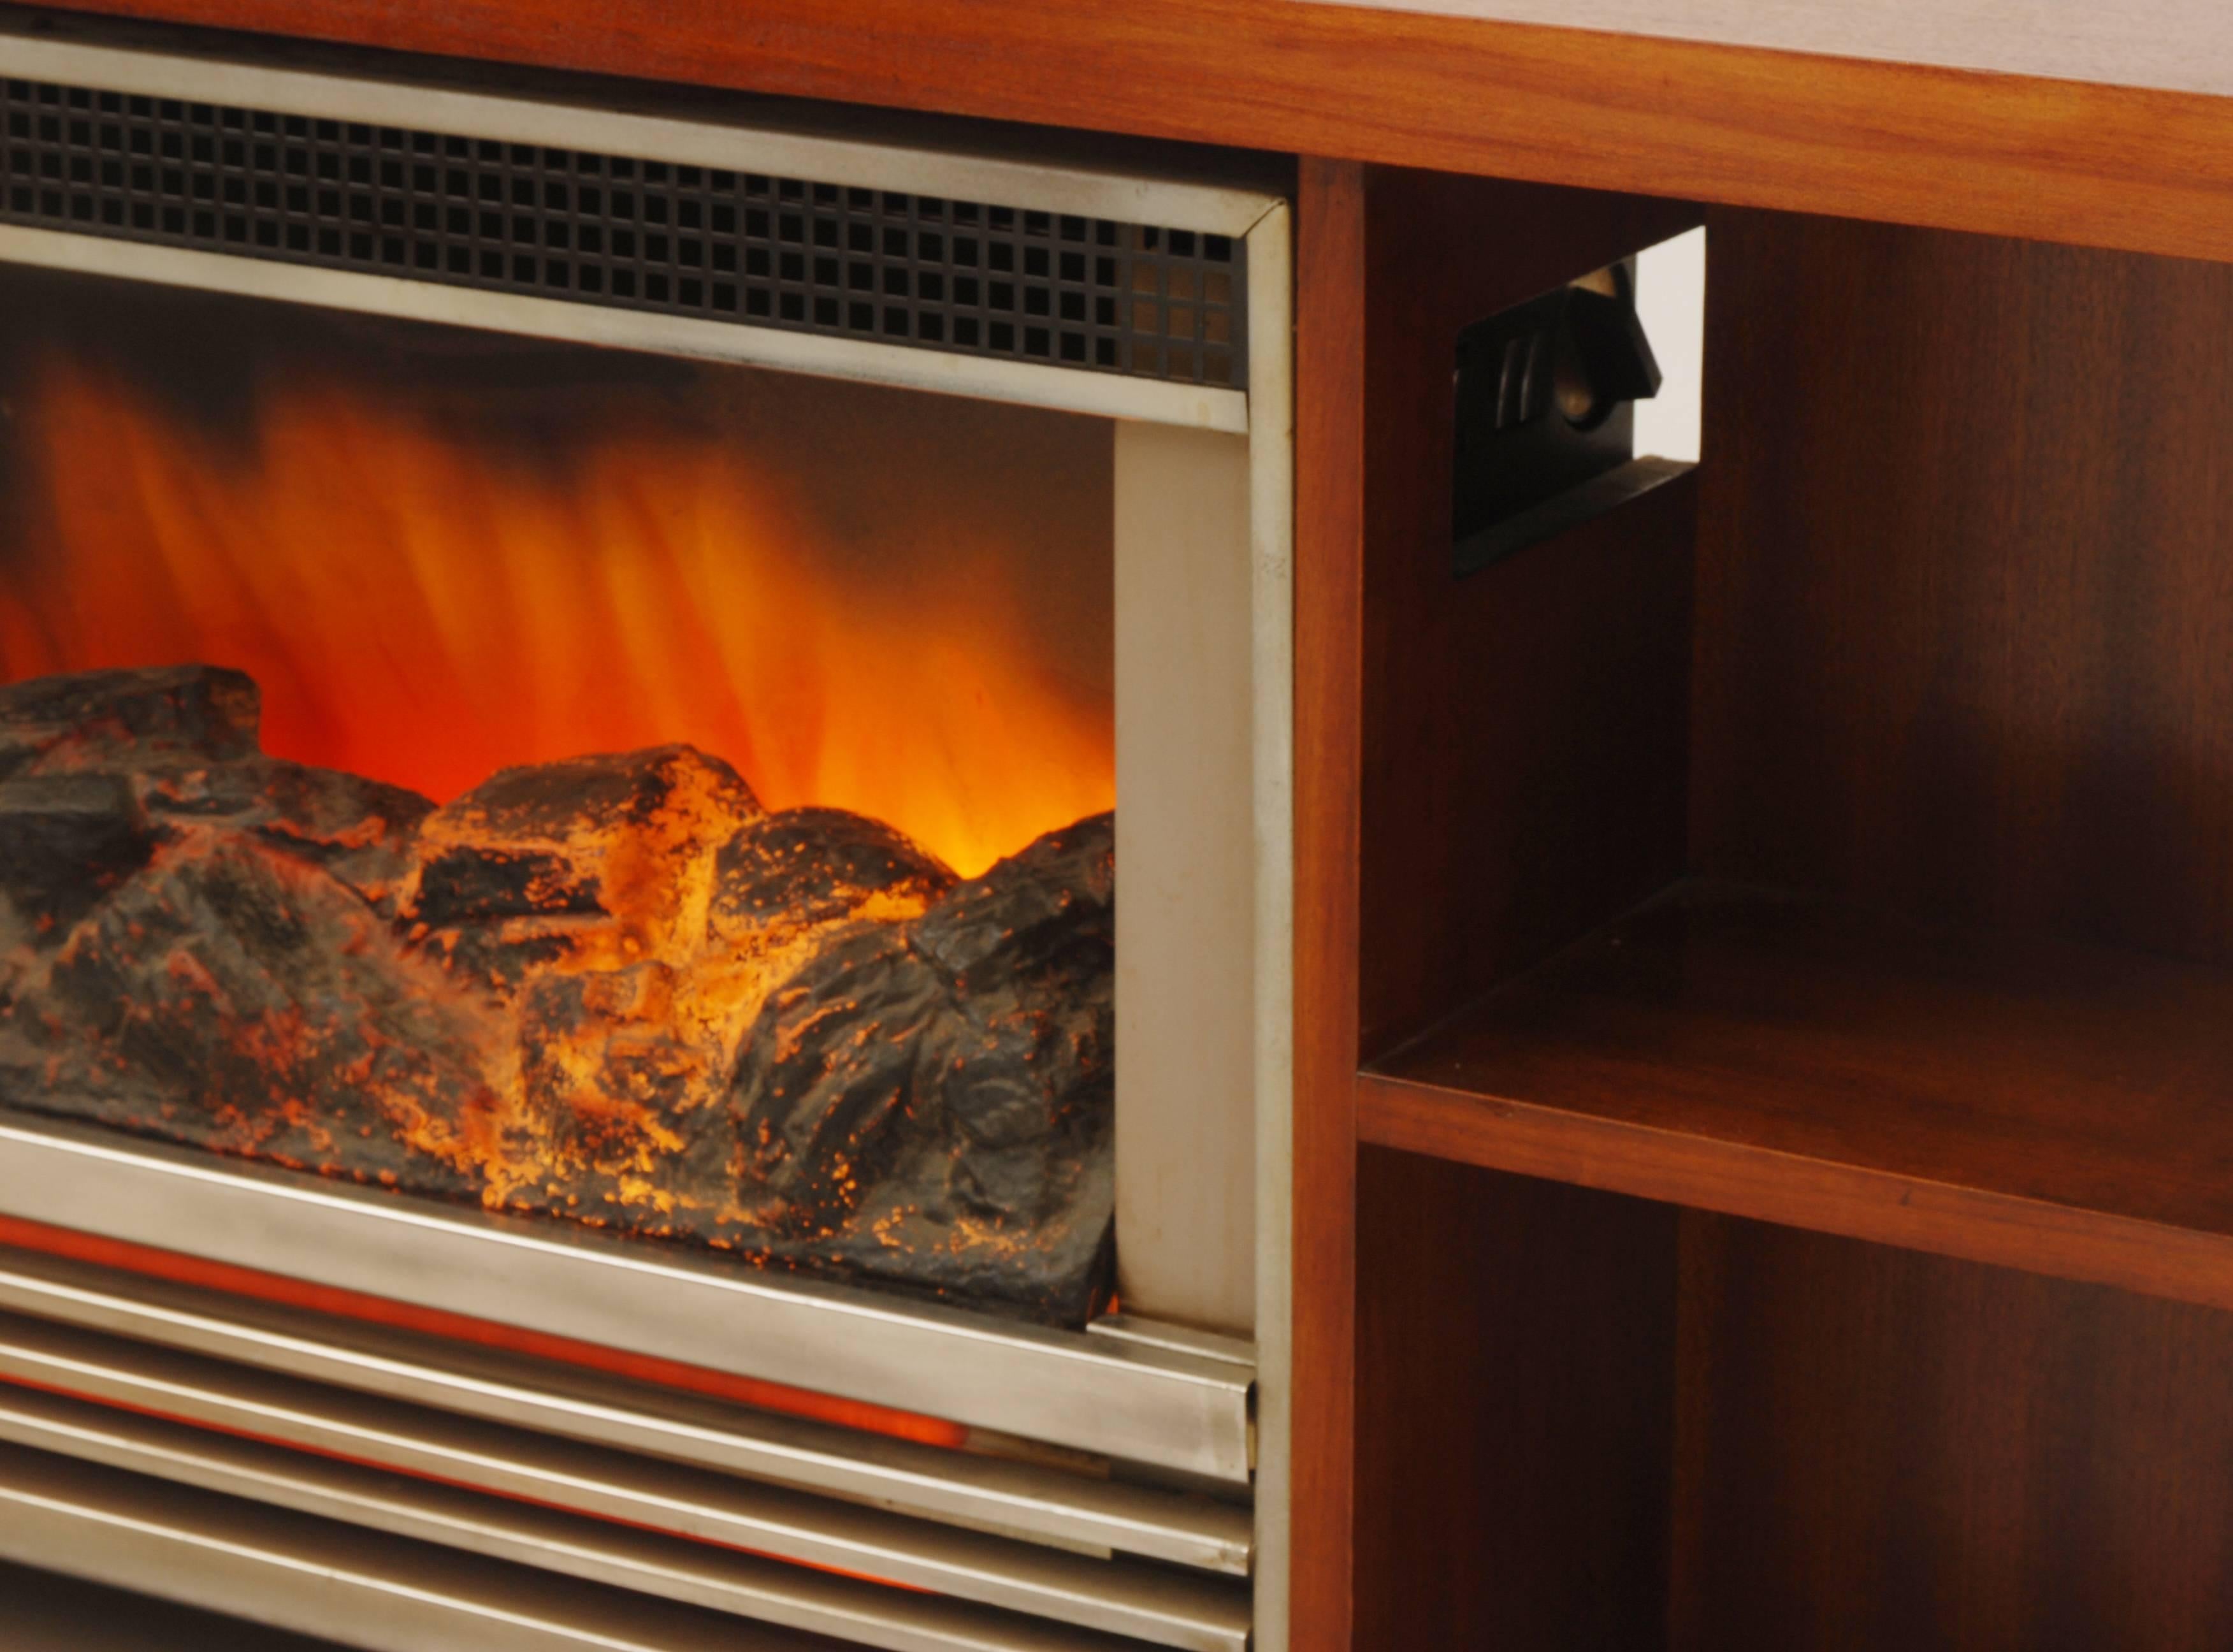 1960s electric fireplace